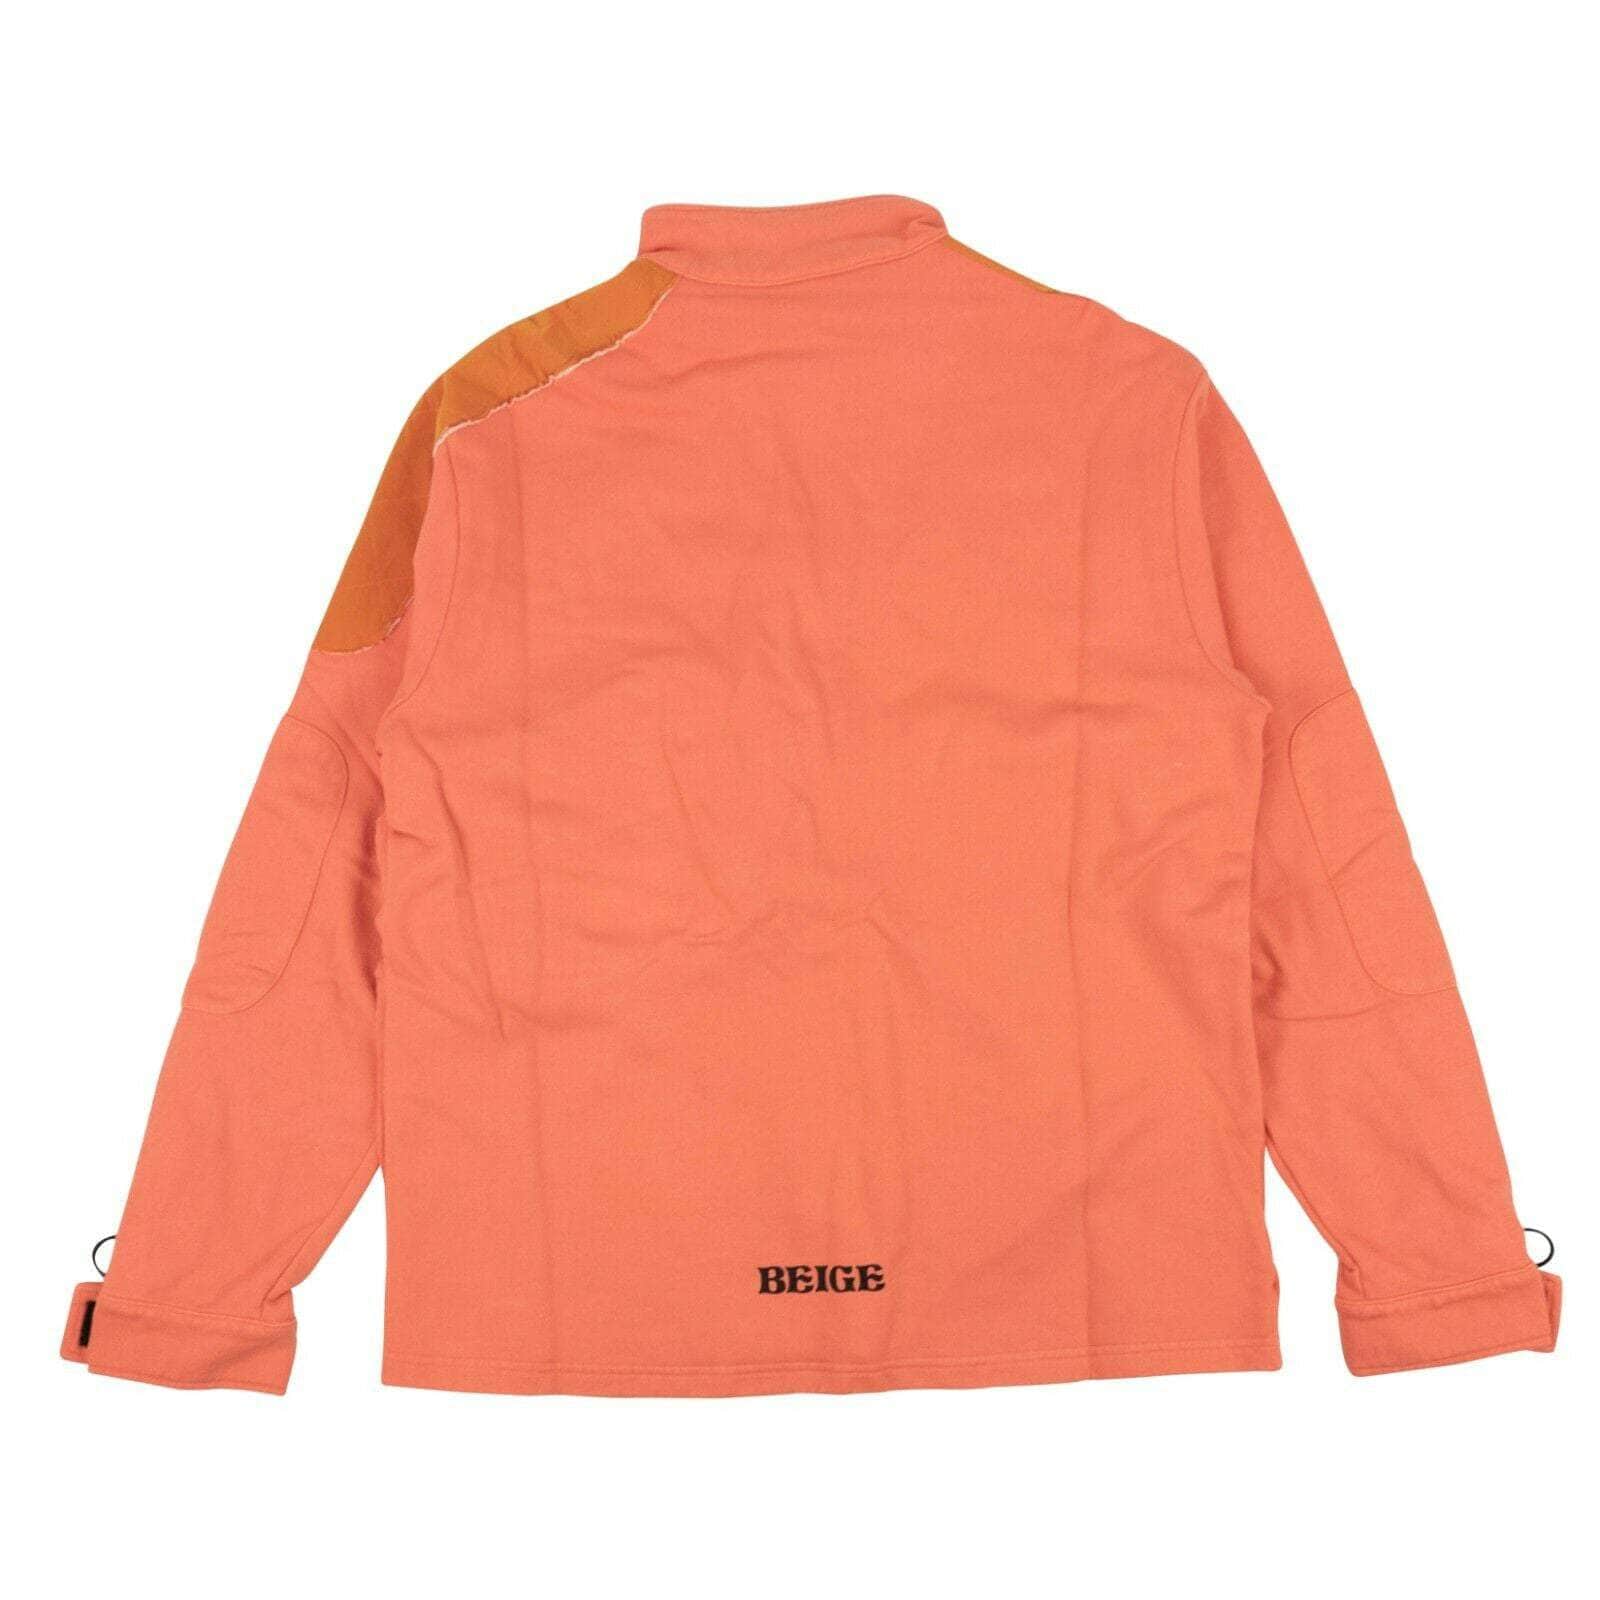 Off-White c/o Virgil Abloh 750-1000, couponcollection, gender-mens, main-clothing, mens-sweatshirts, off white, off-white-c-o-virgil-abloh, size-l, size-m, size-s, size-xl, size-xs, size-xxs, Sweatshirt 'Parachute Half Zip' Sweatshirt - Coral